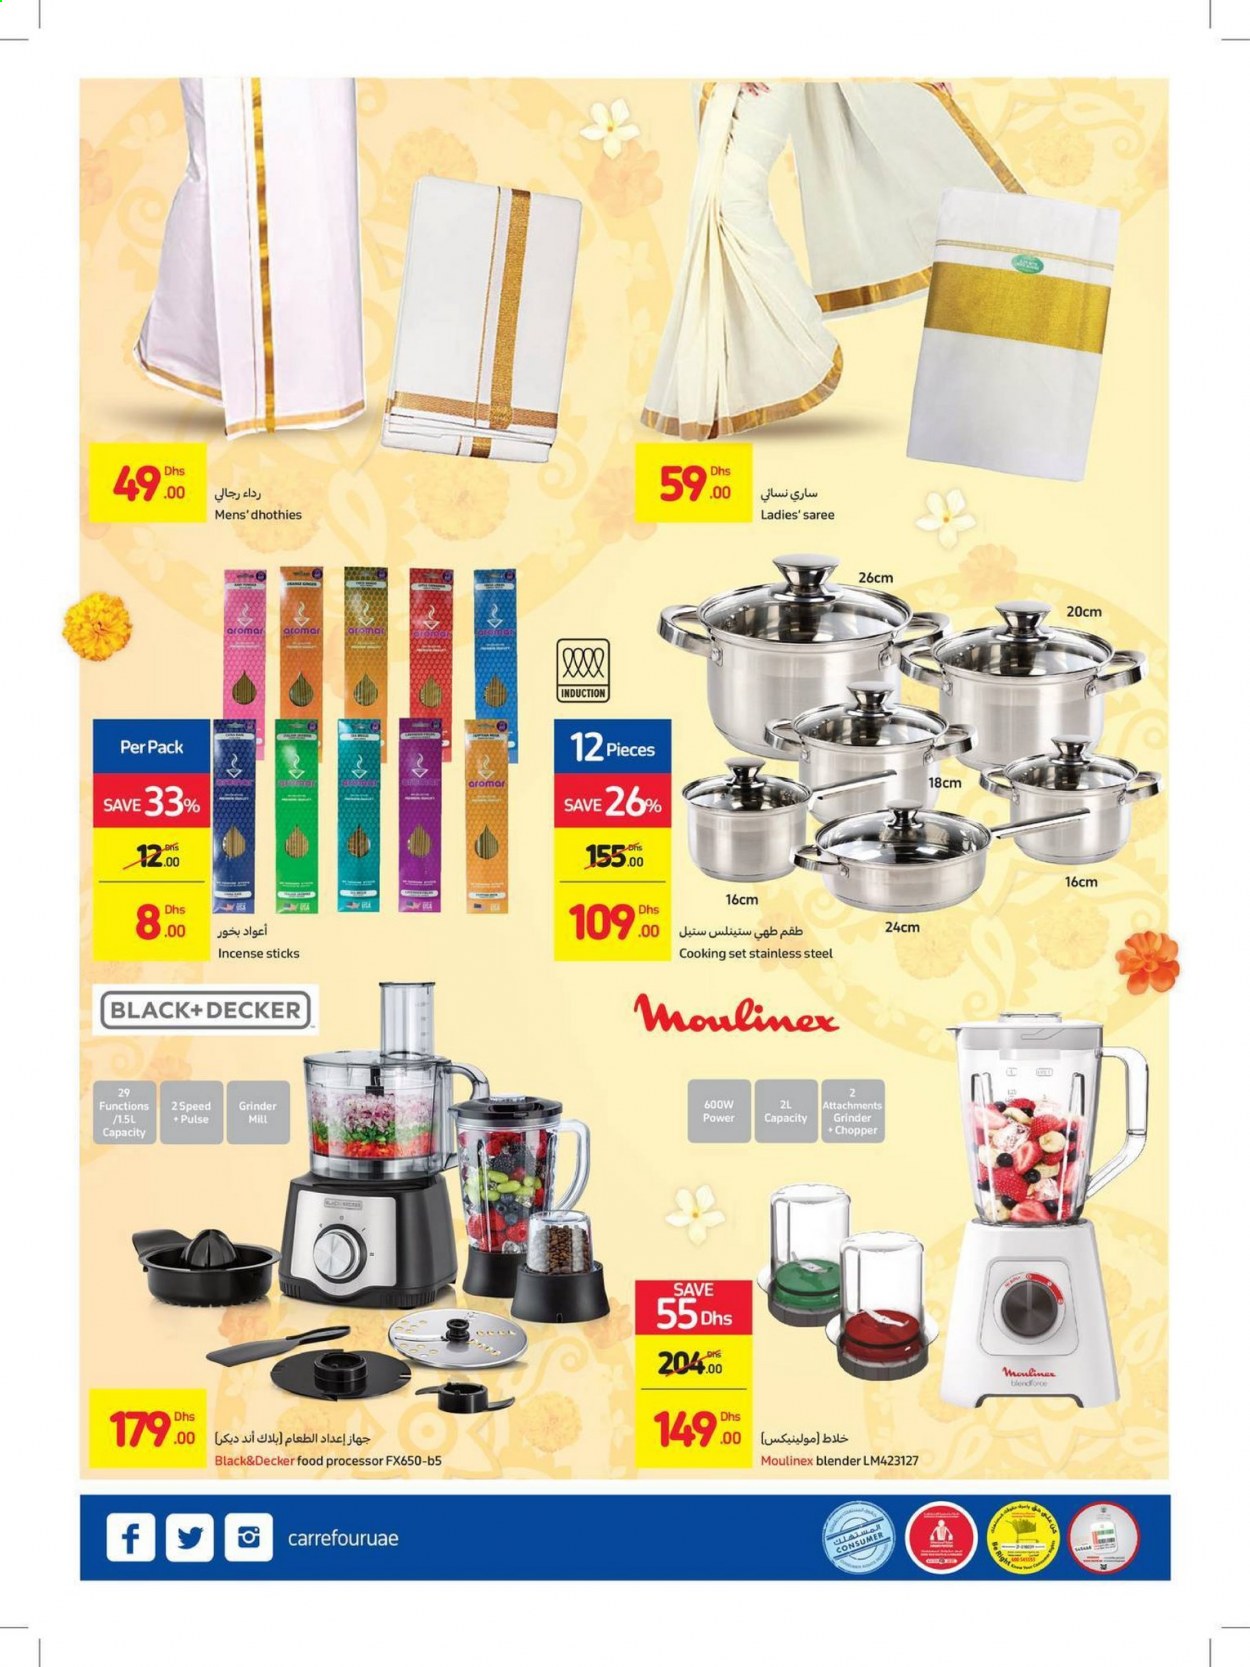 Carrefour offer - 15/08/2021 - 23/08/2021.